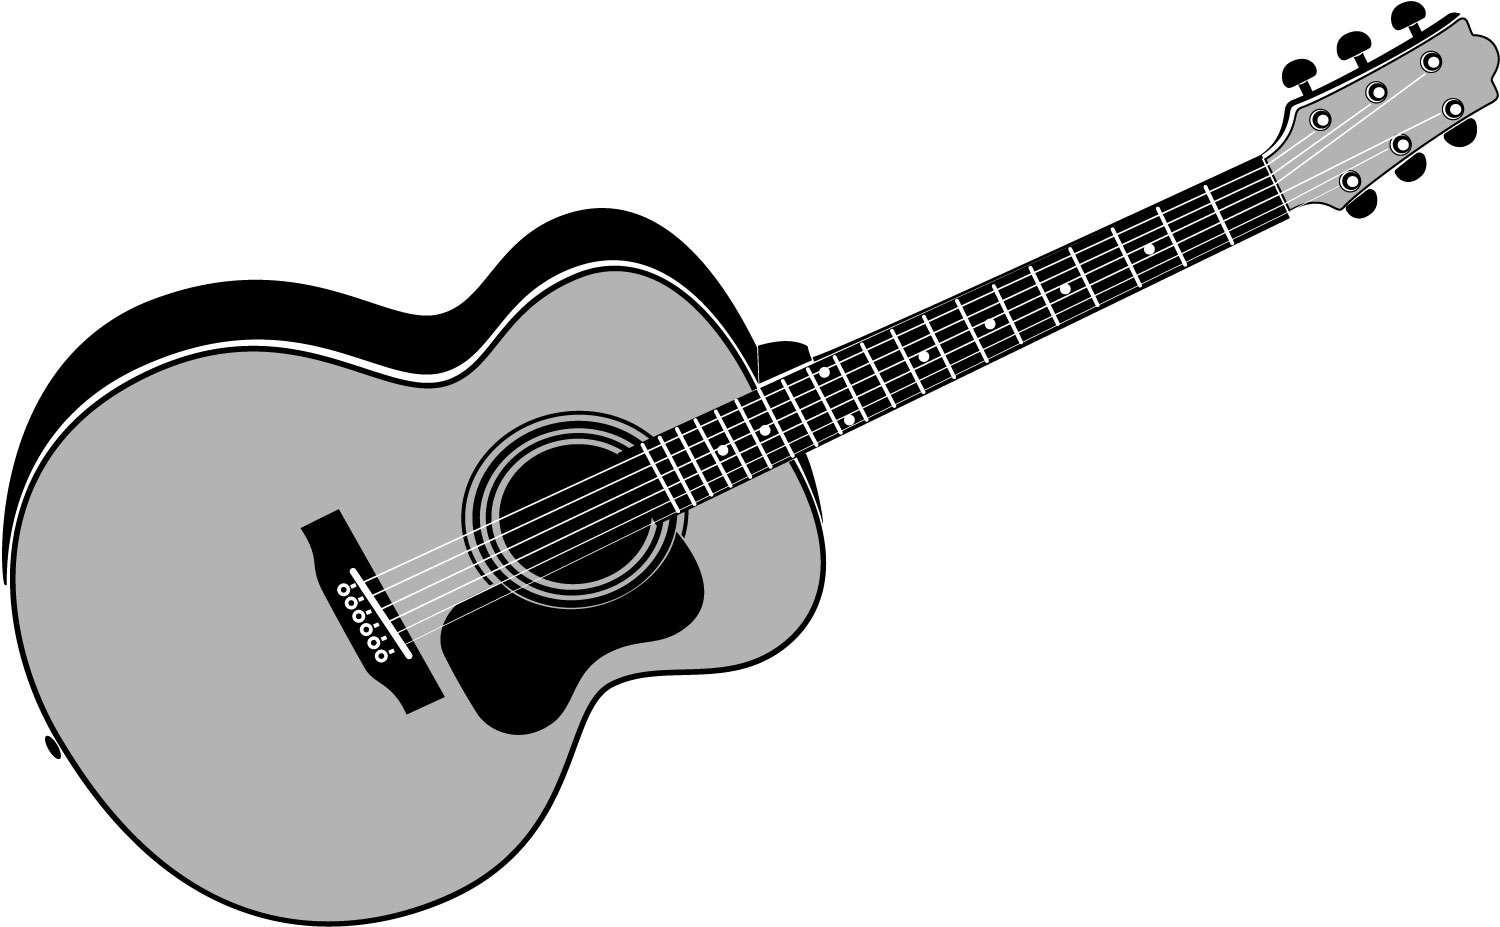 Acoustic guitar clipart free images 4 